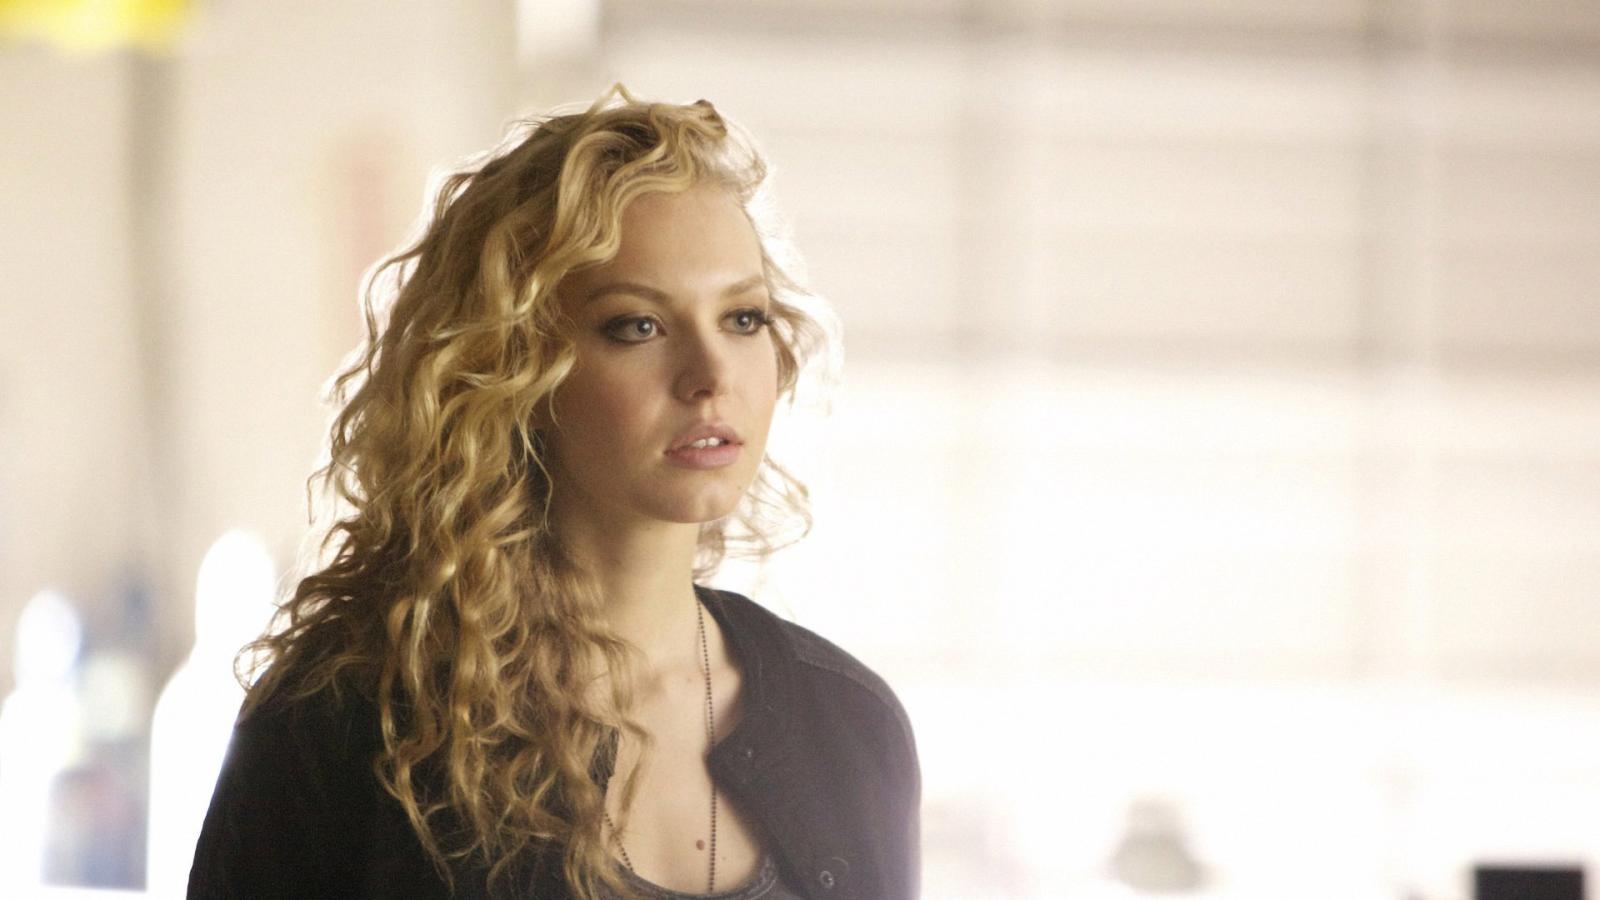 7 Saddest The Vampire Diaries Character Deaths, According to Reddit - image 3